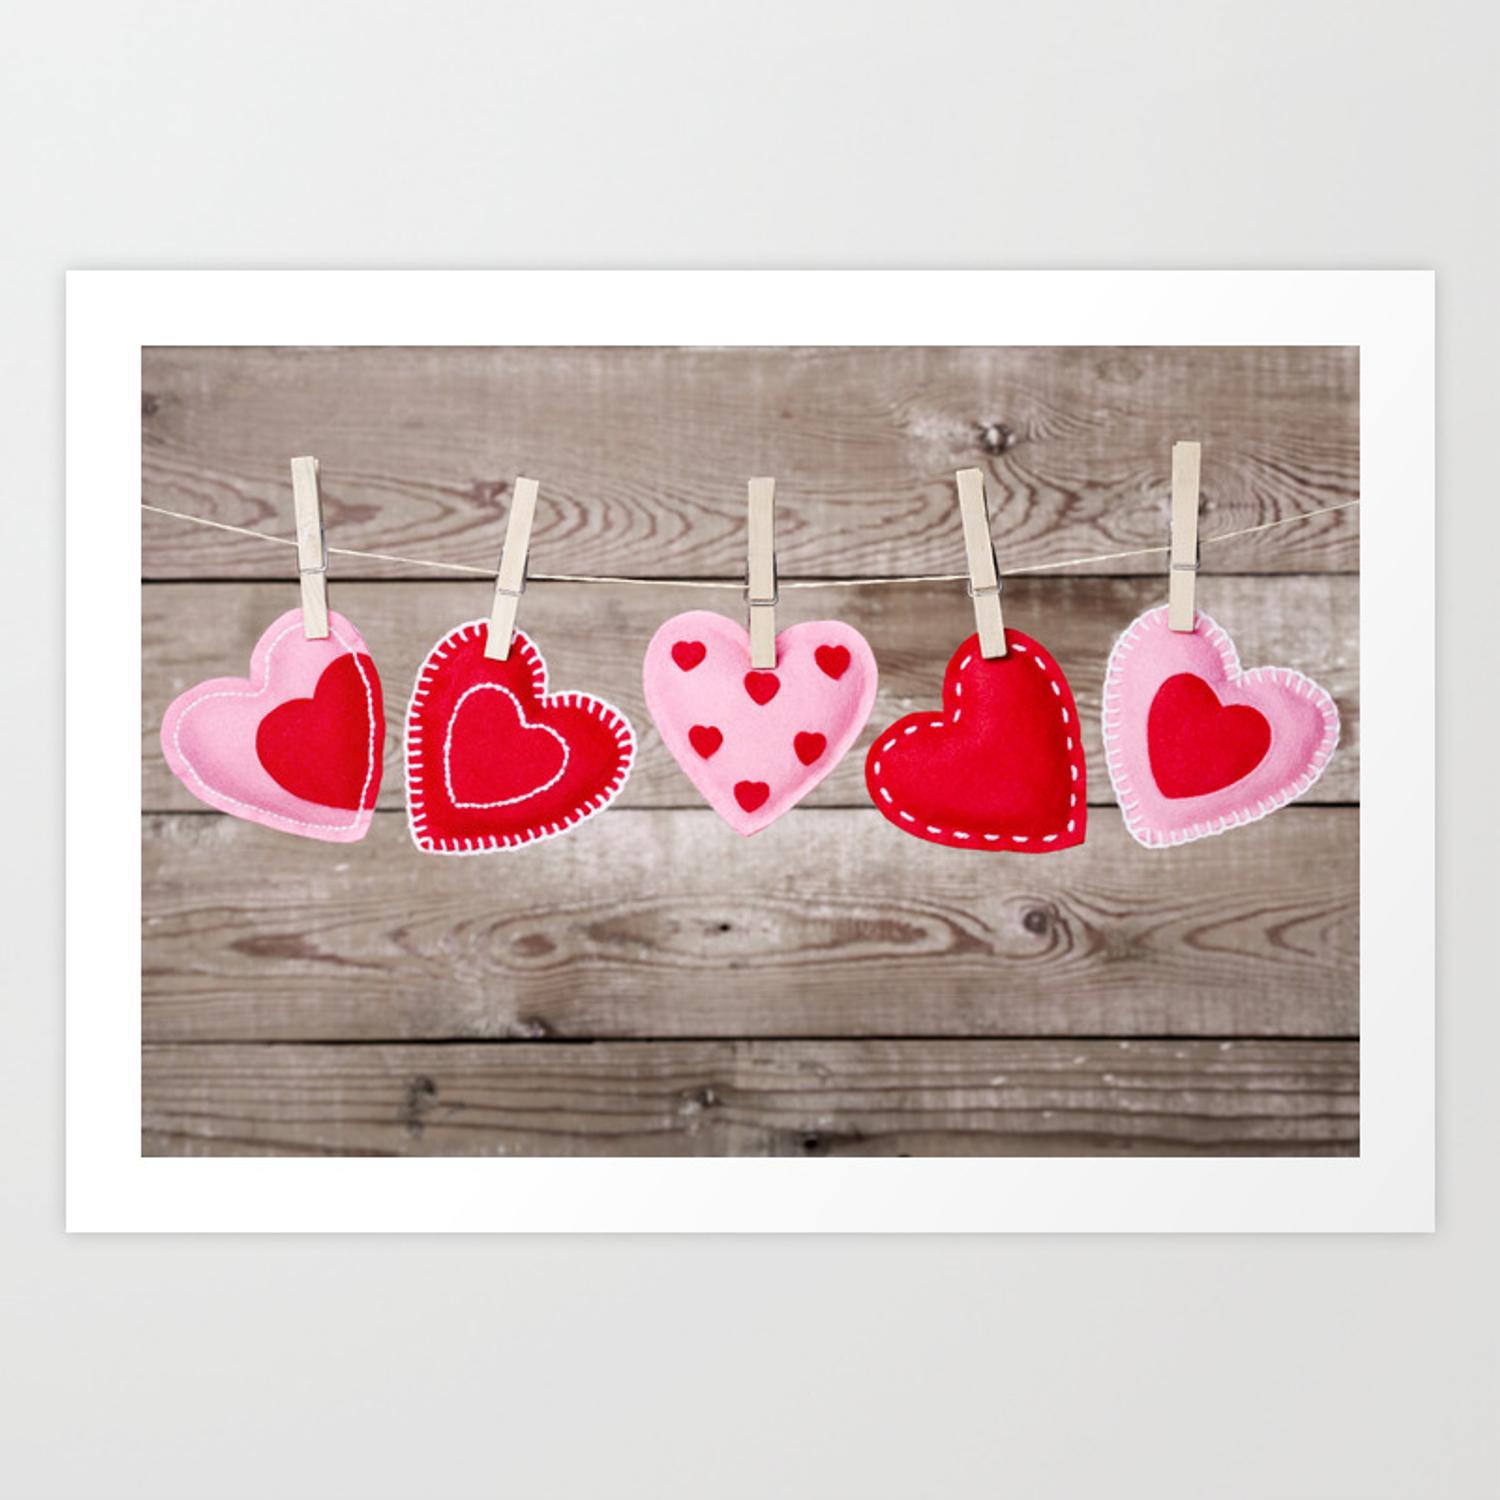 II with Valentine's Day hearts decorations on a rustic background Art Print